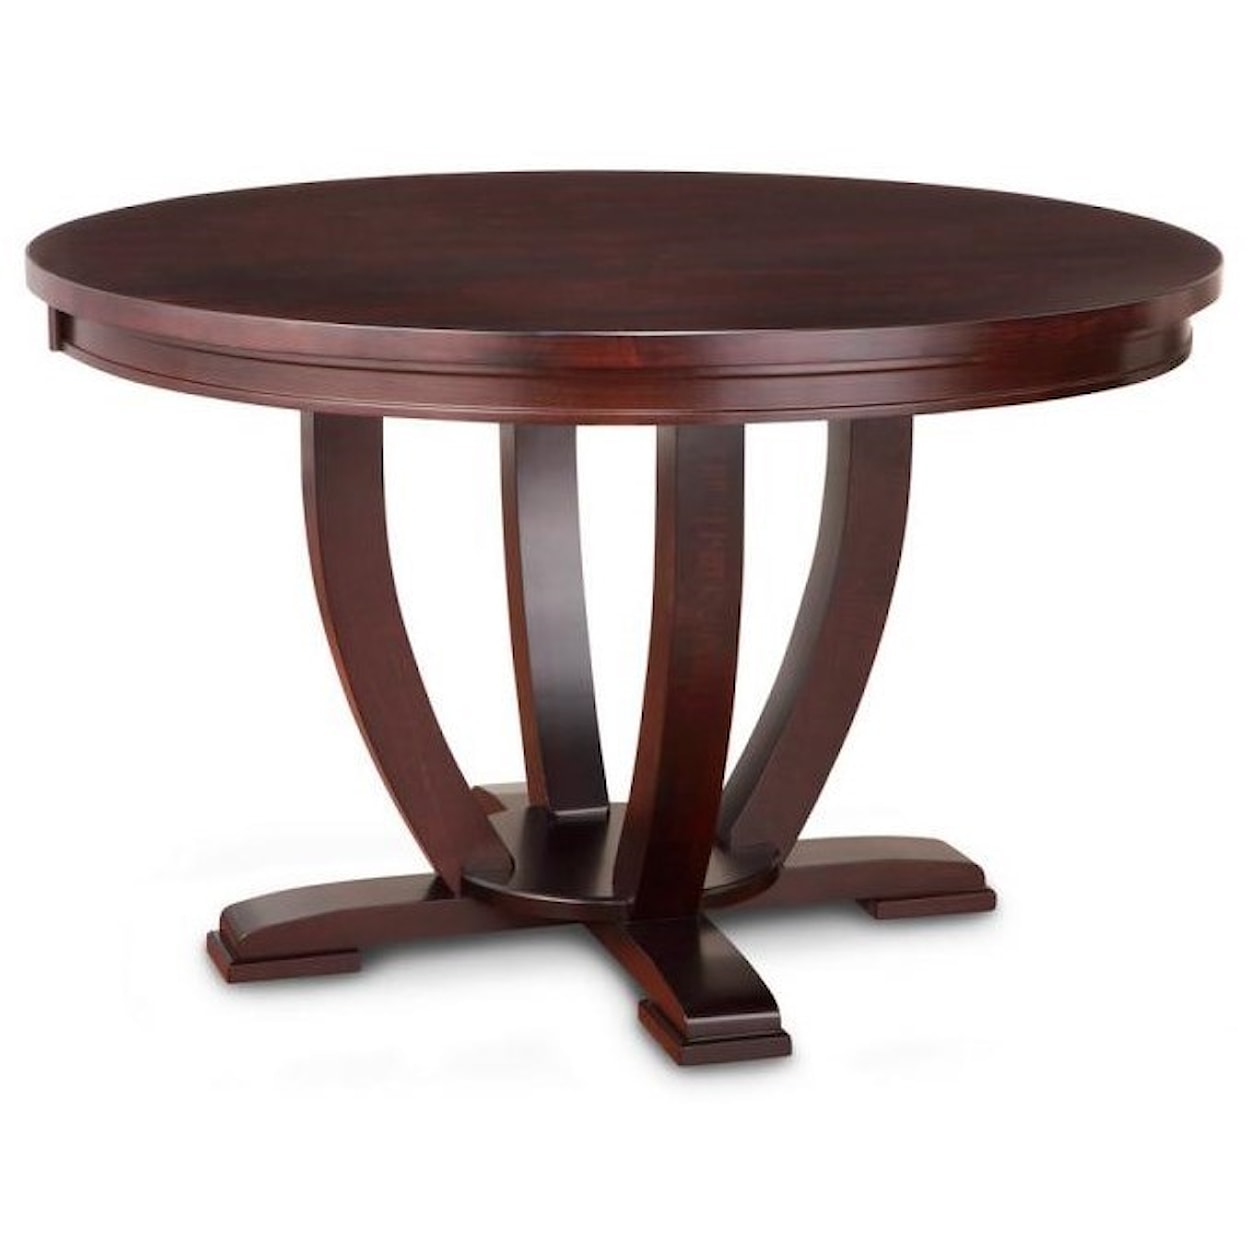 Handstone Florence 48" Round Dining Table